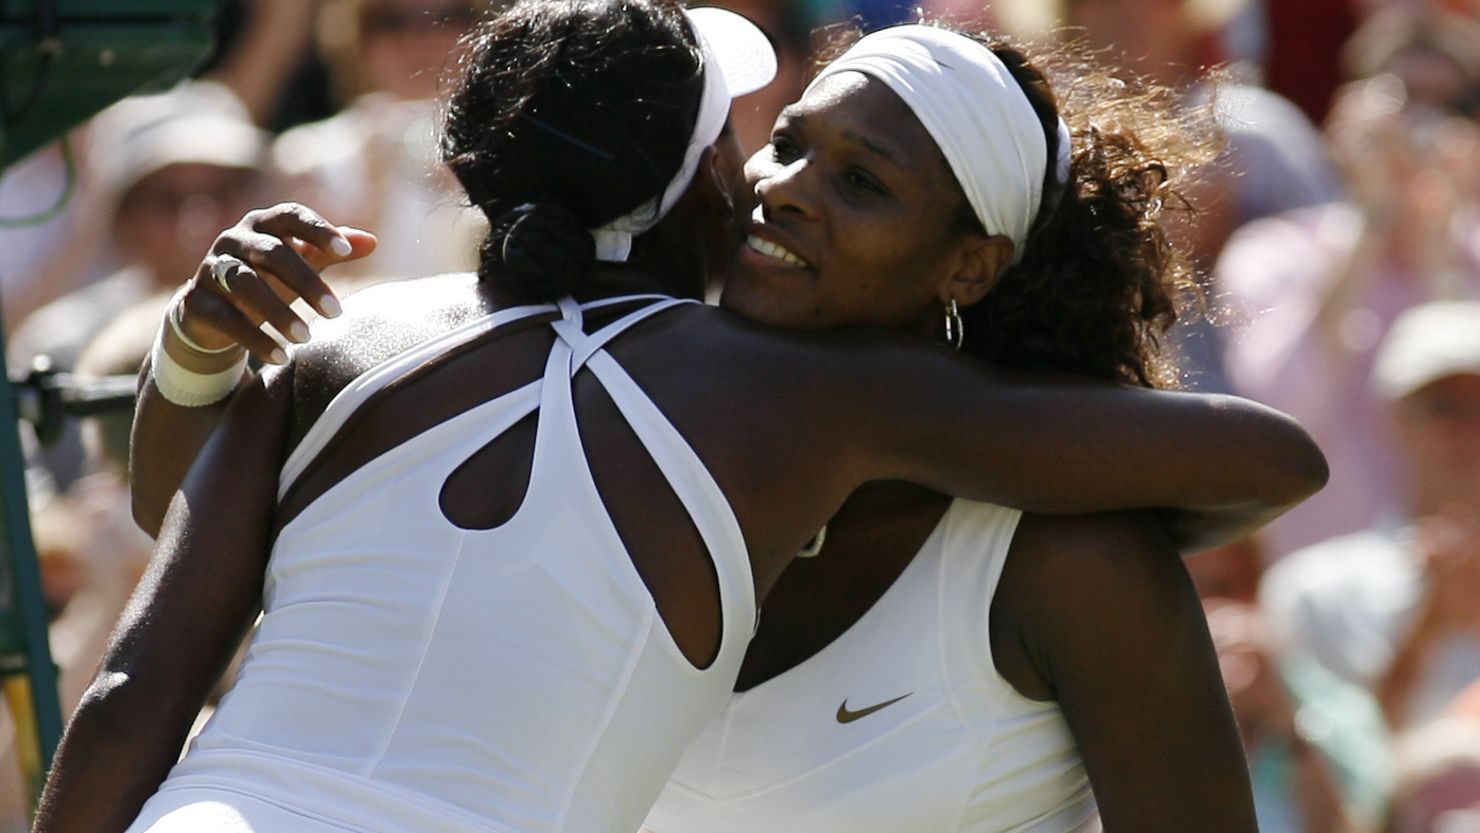 Serena Williams beat sister Venus in the 2009 final -- the last time they met at Wimbledon or in a grand slam.